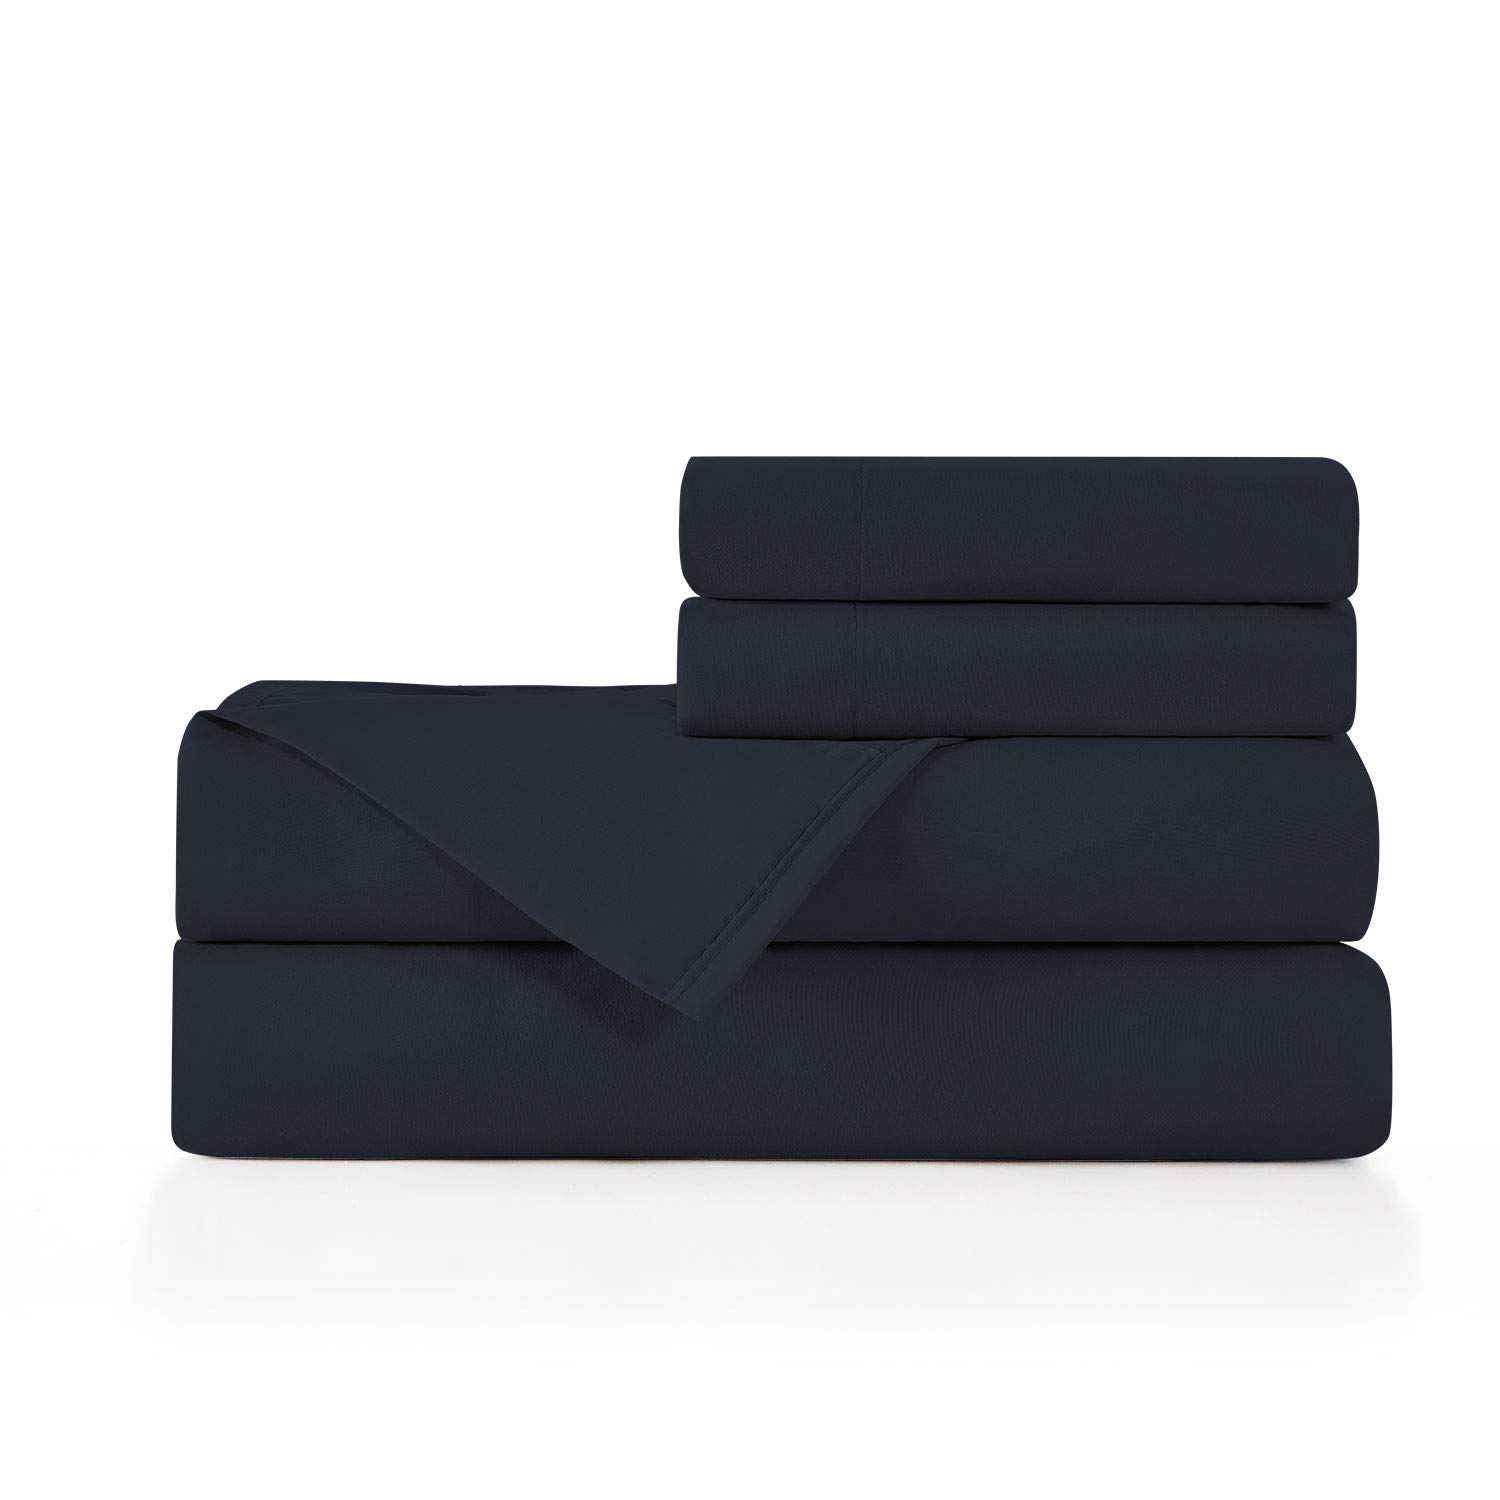 Book Cover BASIC CHOICE Brushed Microfiber Bed Linen Set, Standard 100 by Oeko-Tex, Navy, 3 Pieces, Twin Twin Navy